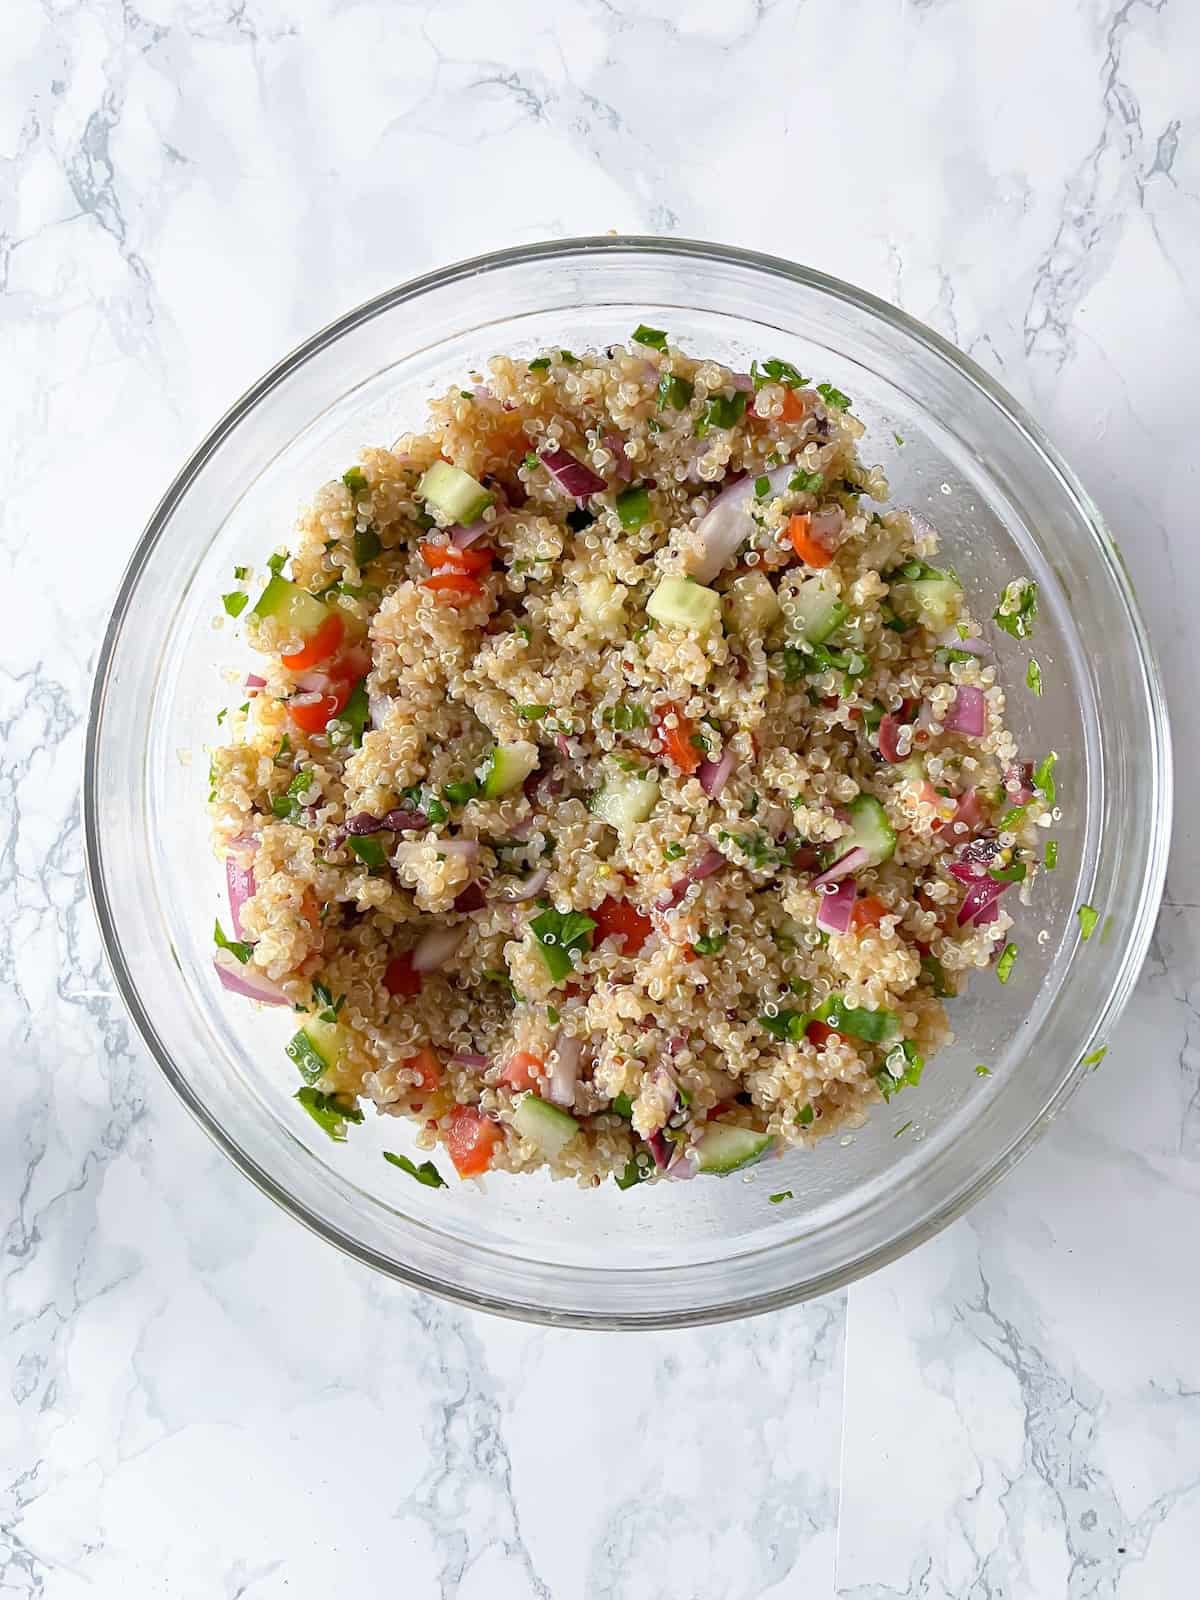 quinoa salad in a glass bowl with fresh veggies and a lemon olive oil dressing